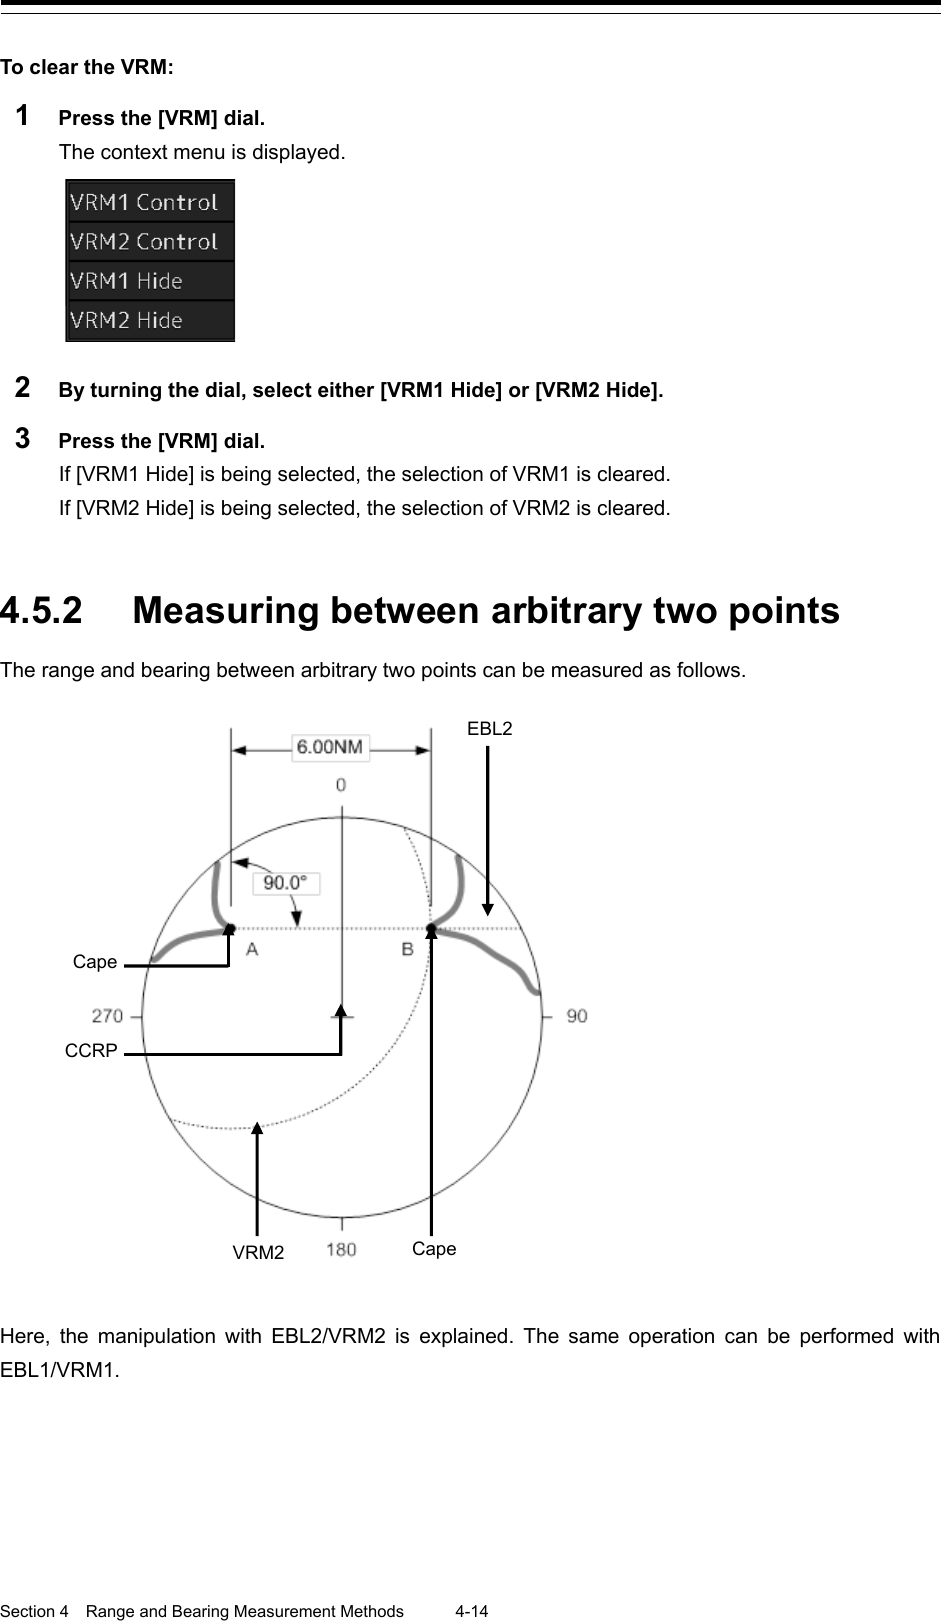  Section 4  Range and Bearing Measurement Methods 4-14  To clear the VRM: 1  Press the [VRM] dial. The context menu is displayed.  2  By turning the dial, select either [VRM1 Hide] or [VRM2 Hide]. 3  Press the [VRM] dial. If [VRM1 Hide] is being selected, the selection of VRM1 is cleared. If [VRM2 Hide] is being selected, the selection of VRM2 is cleared.    4.5.2 Measuring between arbitrary two points The range and bearing between arbitrary two points can be measured as follows.   Here, the manipulation with EBL2/VRM2 is explained. The same operation can be performed with EBL1/VRM1.   EBL2 Cape VRM2 CCRP Cape 